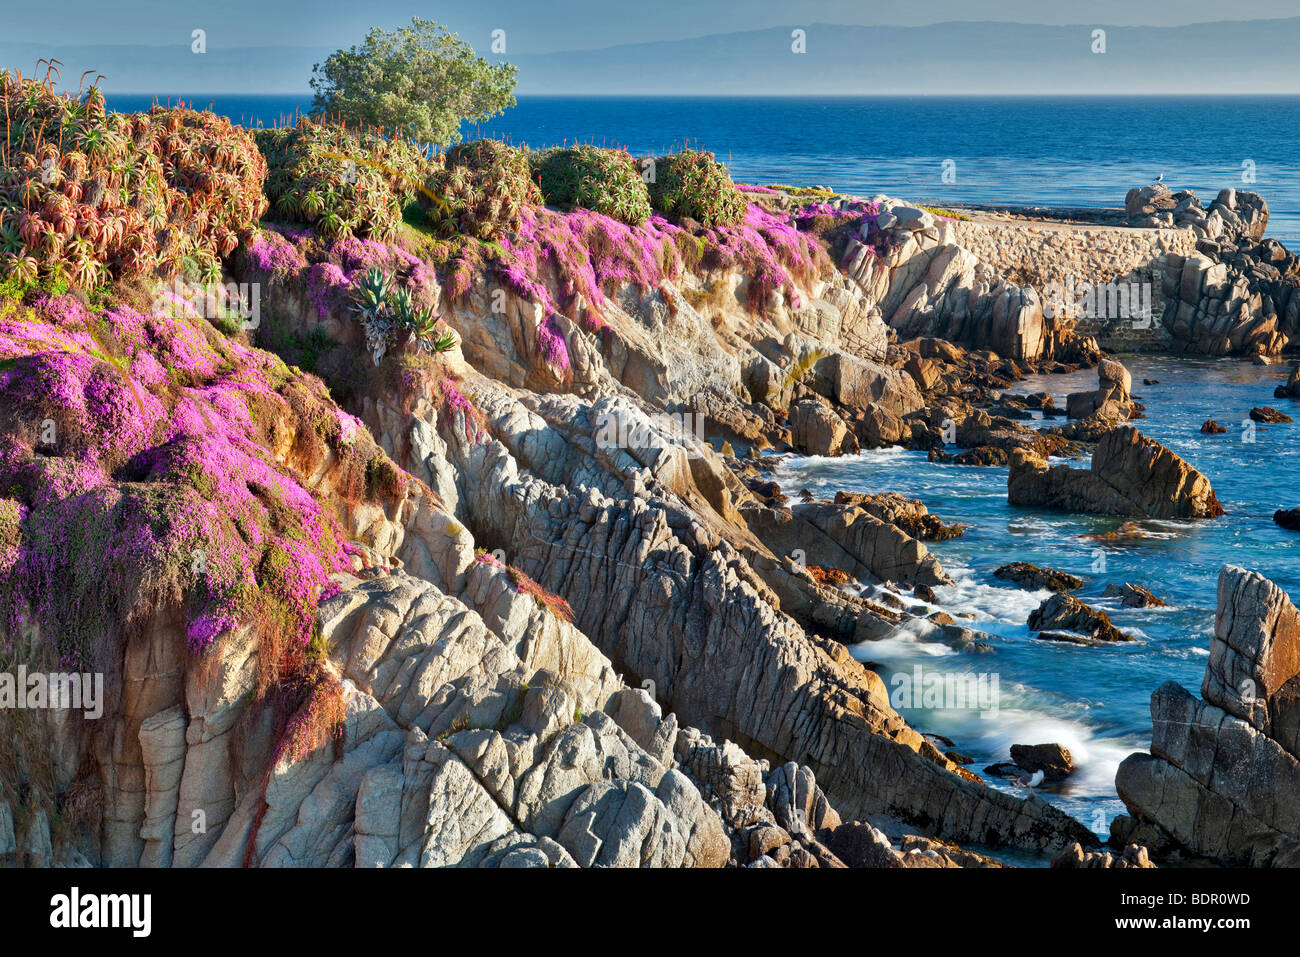 purple-ice-plant-blossoms-and-ocean-pacific-grove-california-BDR0WD.jpg